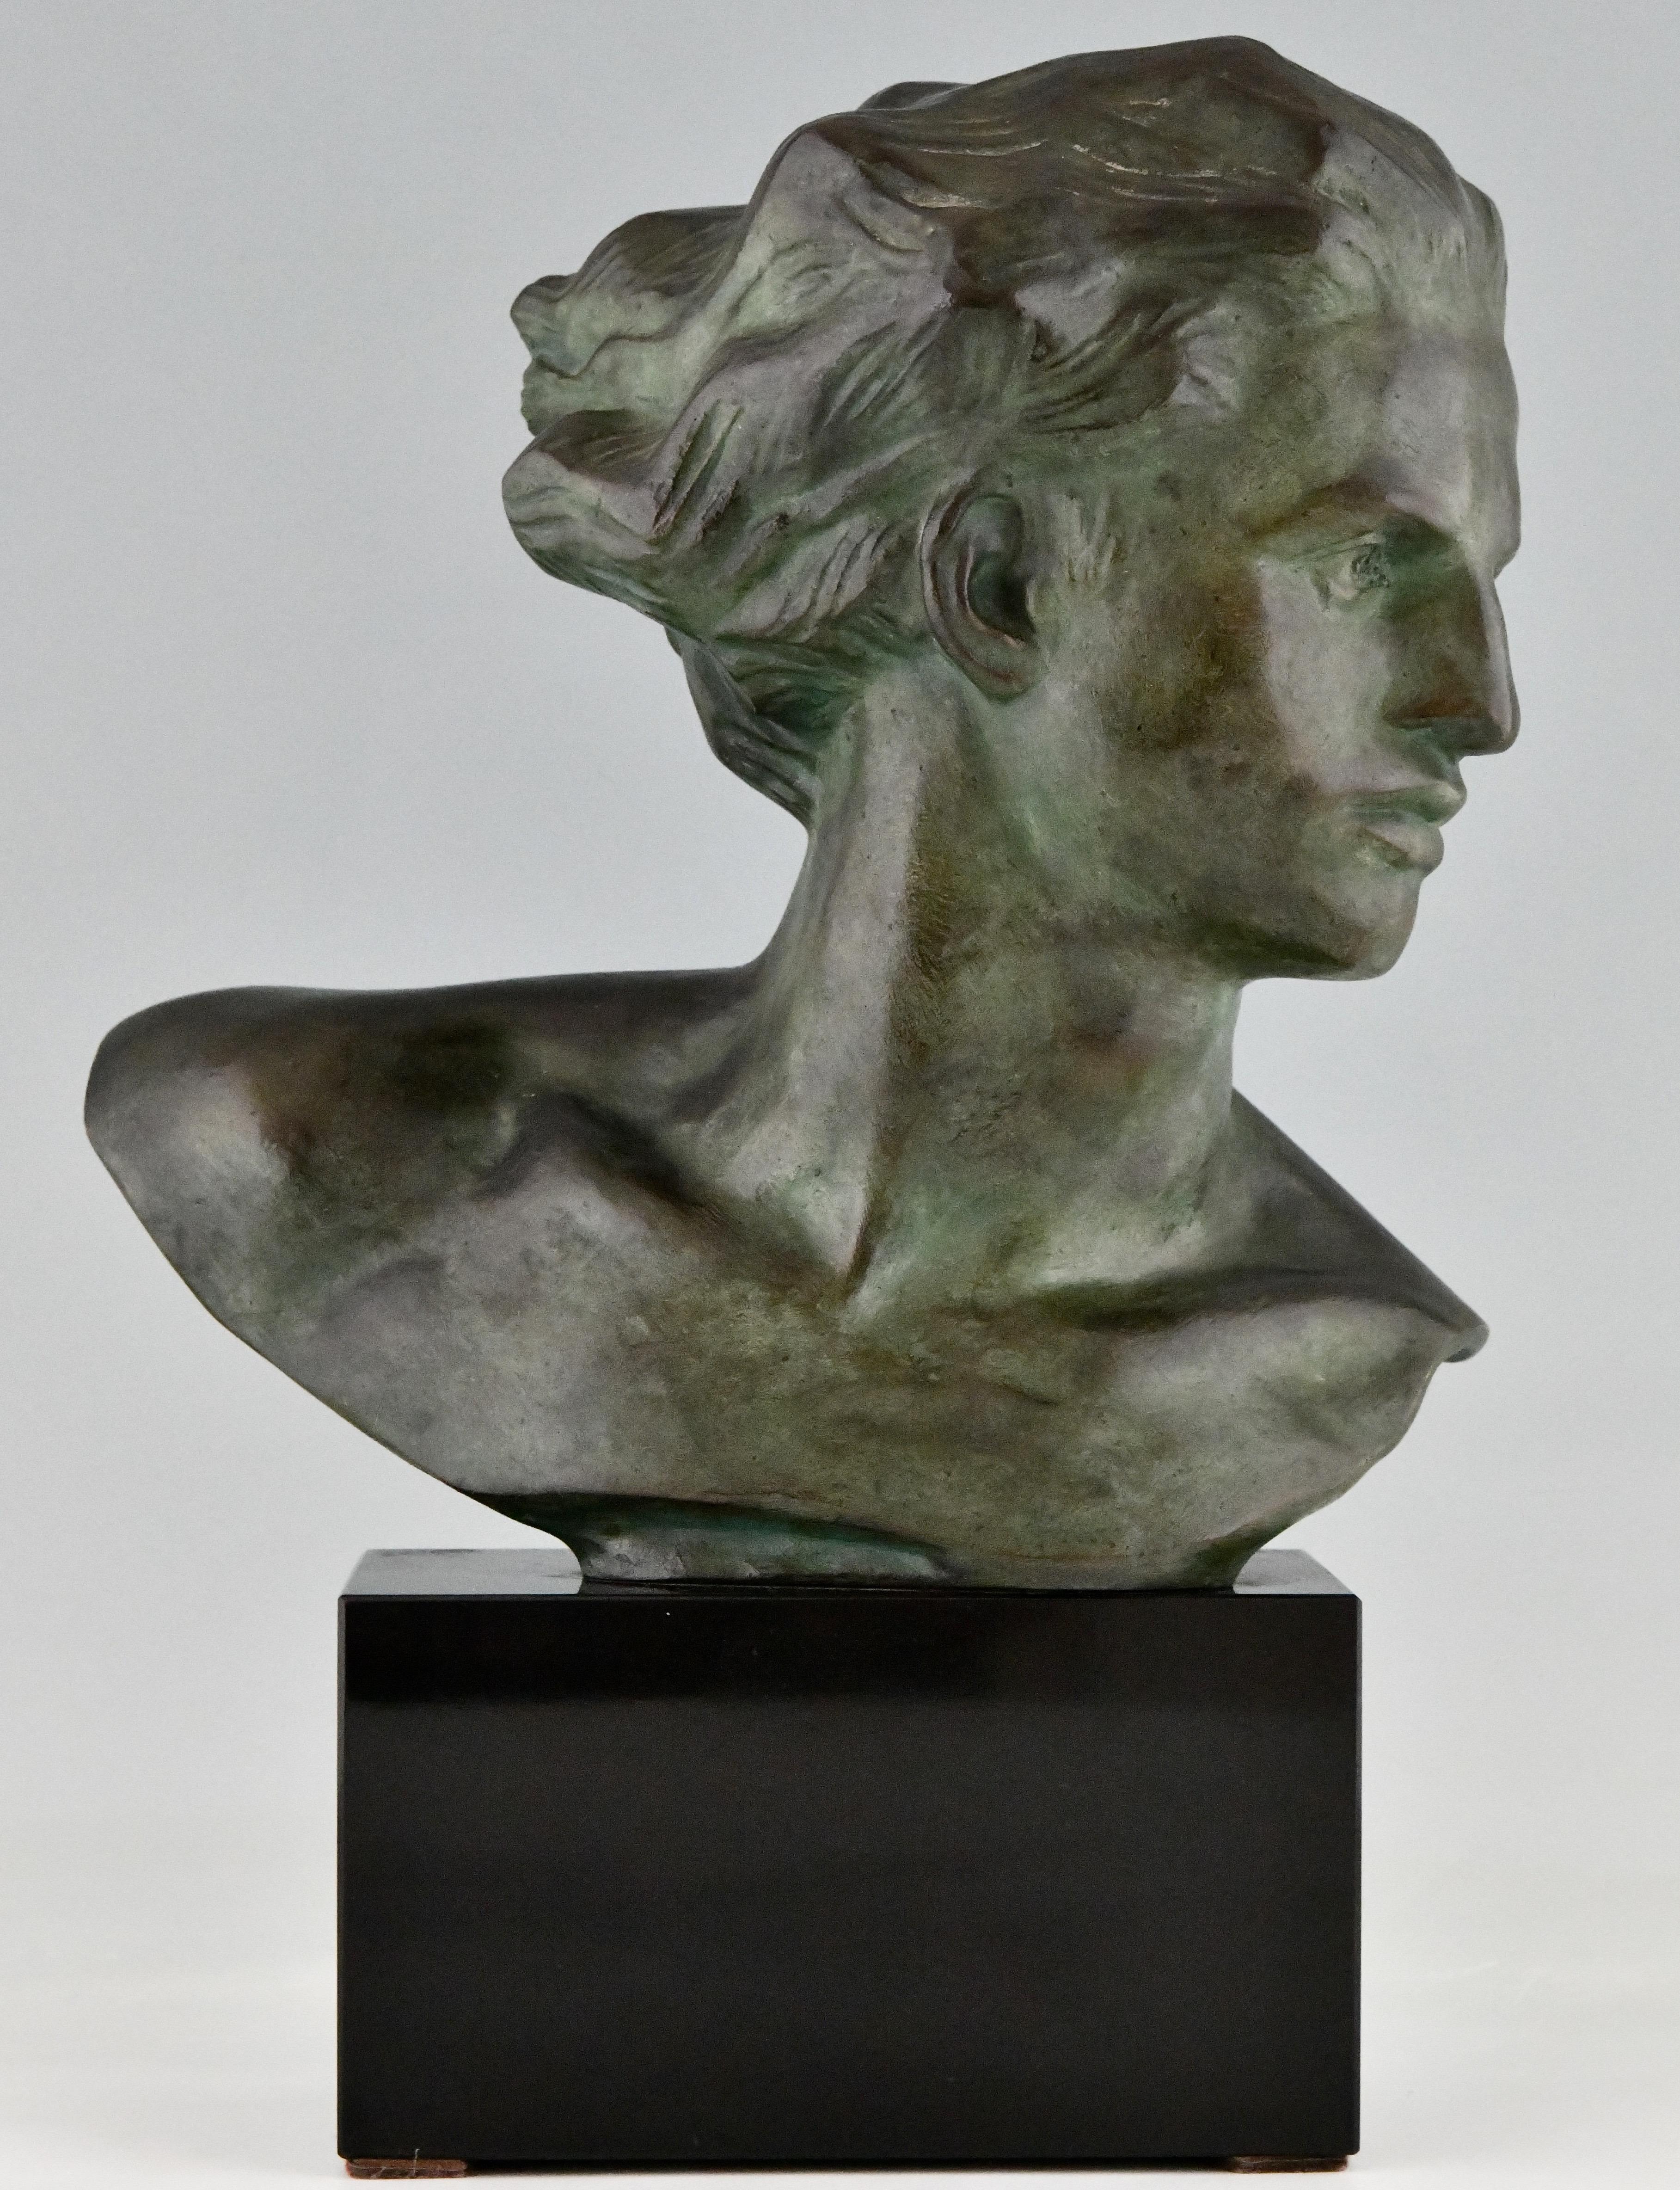 Art Deco bronze sculpture, male bust of the aviator Jean Mermoz. 
By the artist Georges Gori. The bronze statue has a green patina and is mounted on a Belgian Black marble base. France 1930.
Literature:
Benezit. Statuettes of the Art Deco period.